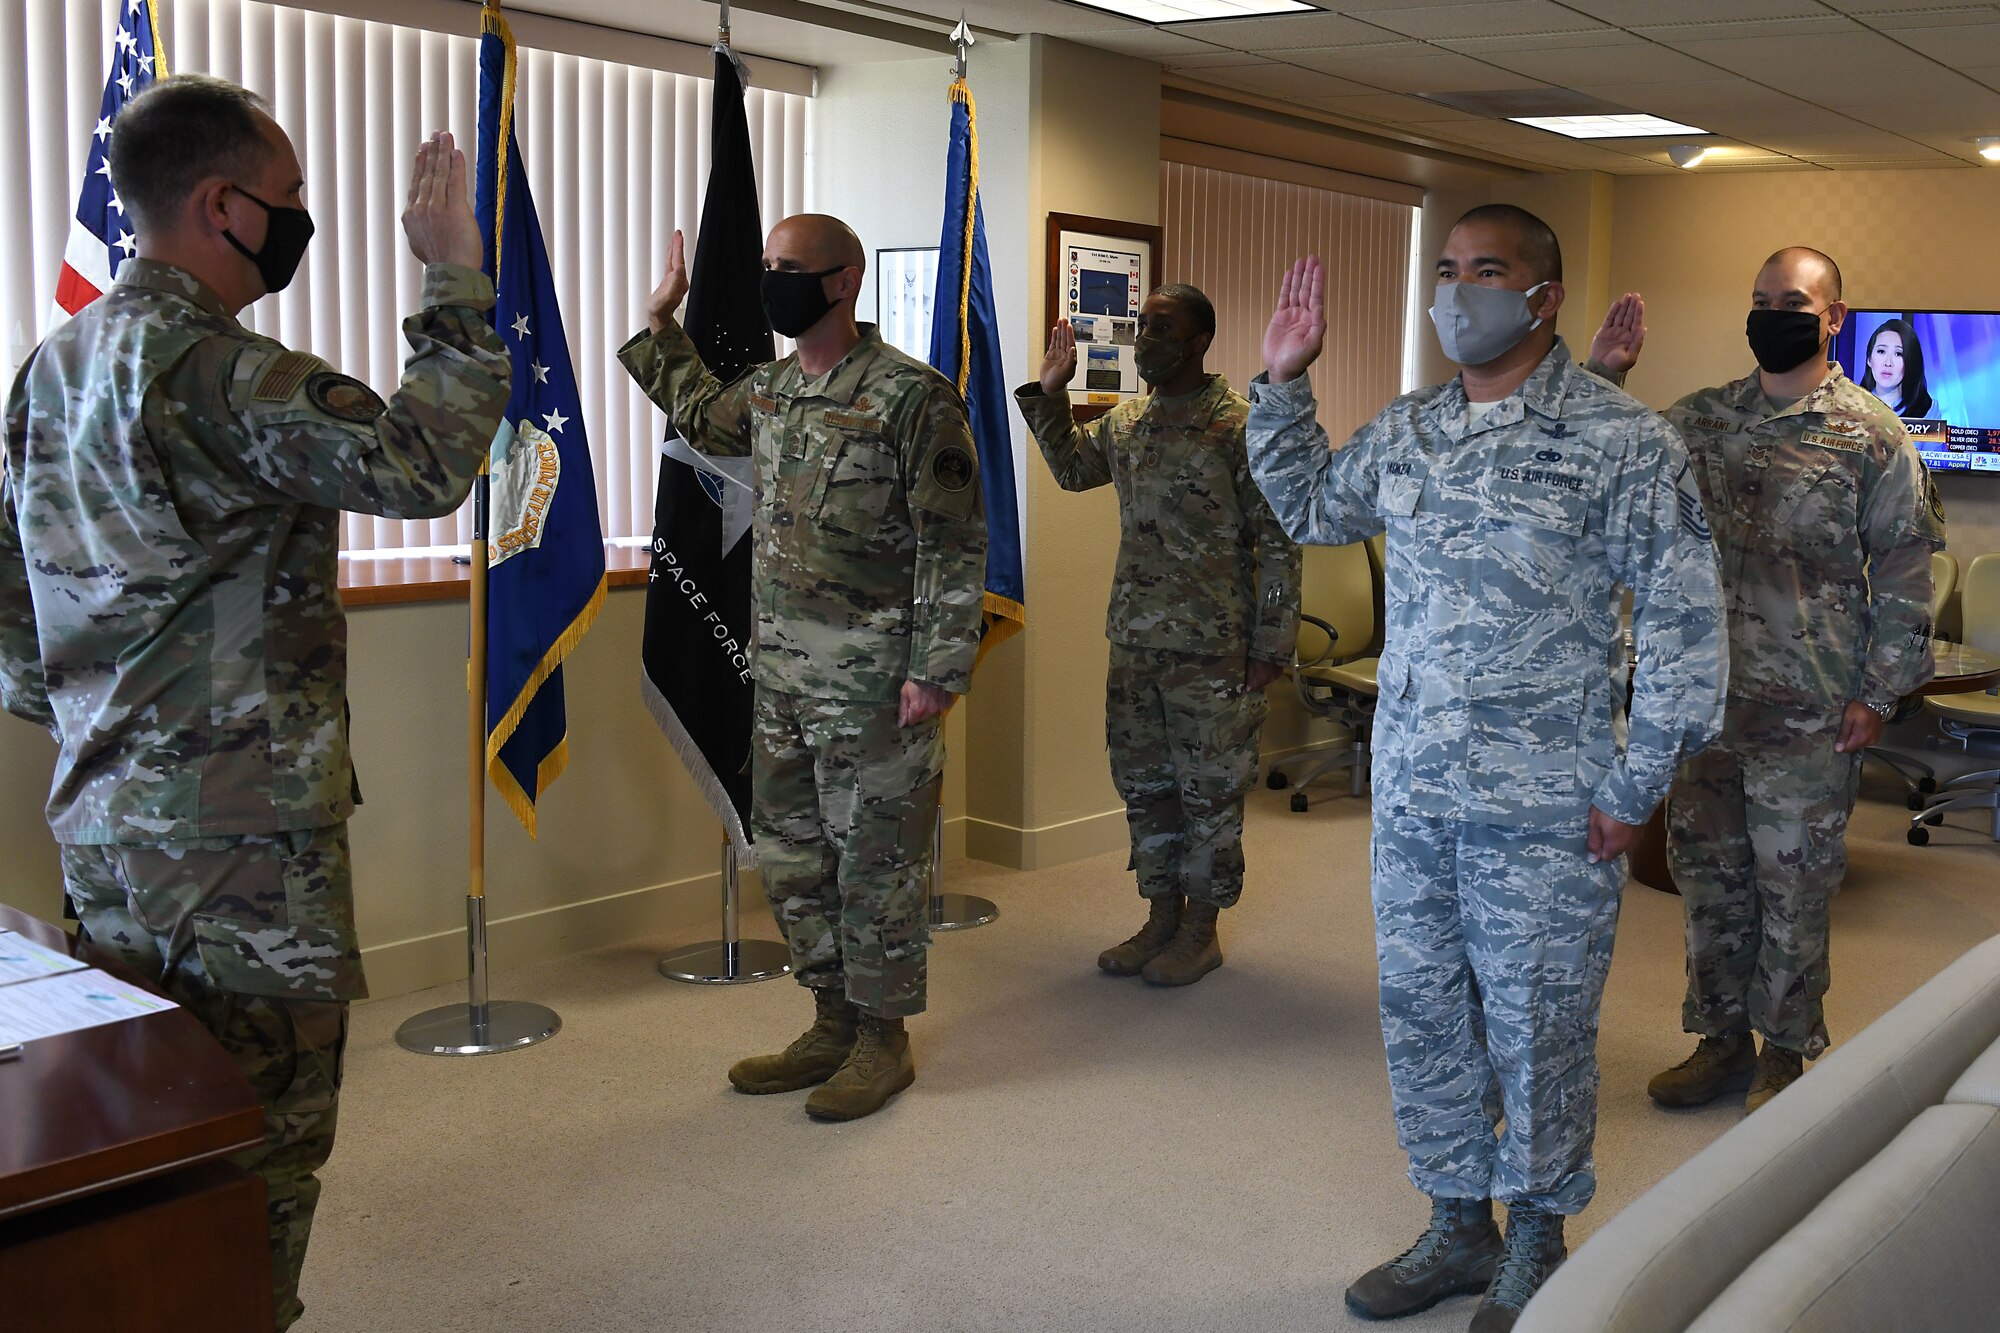 Maj. Gen. John E. Shaw, U.S. Space Force’s Space Operations Command commander, gives the enlisted oath to four enlisted members assigned to Vandenberg Air Force Base into the United States Space Force, Sept. 1, 2020, at Vandenberg AFB, Calif.